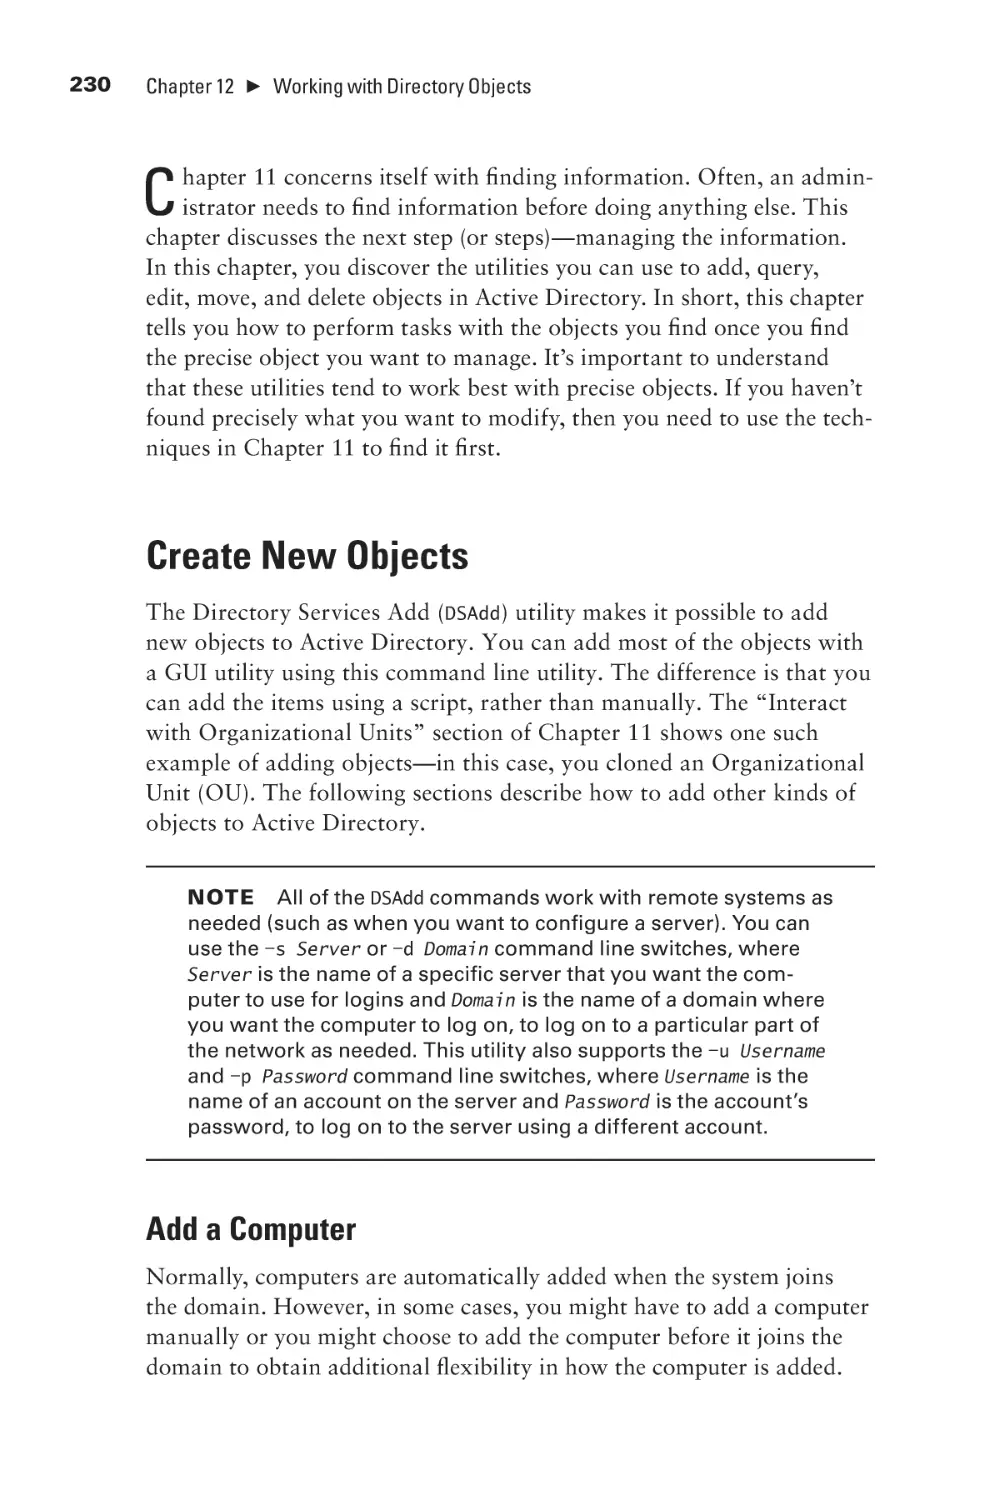 Create New Objects